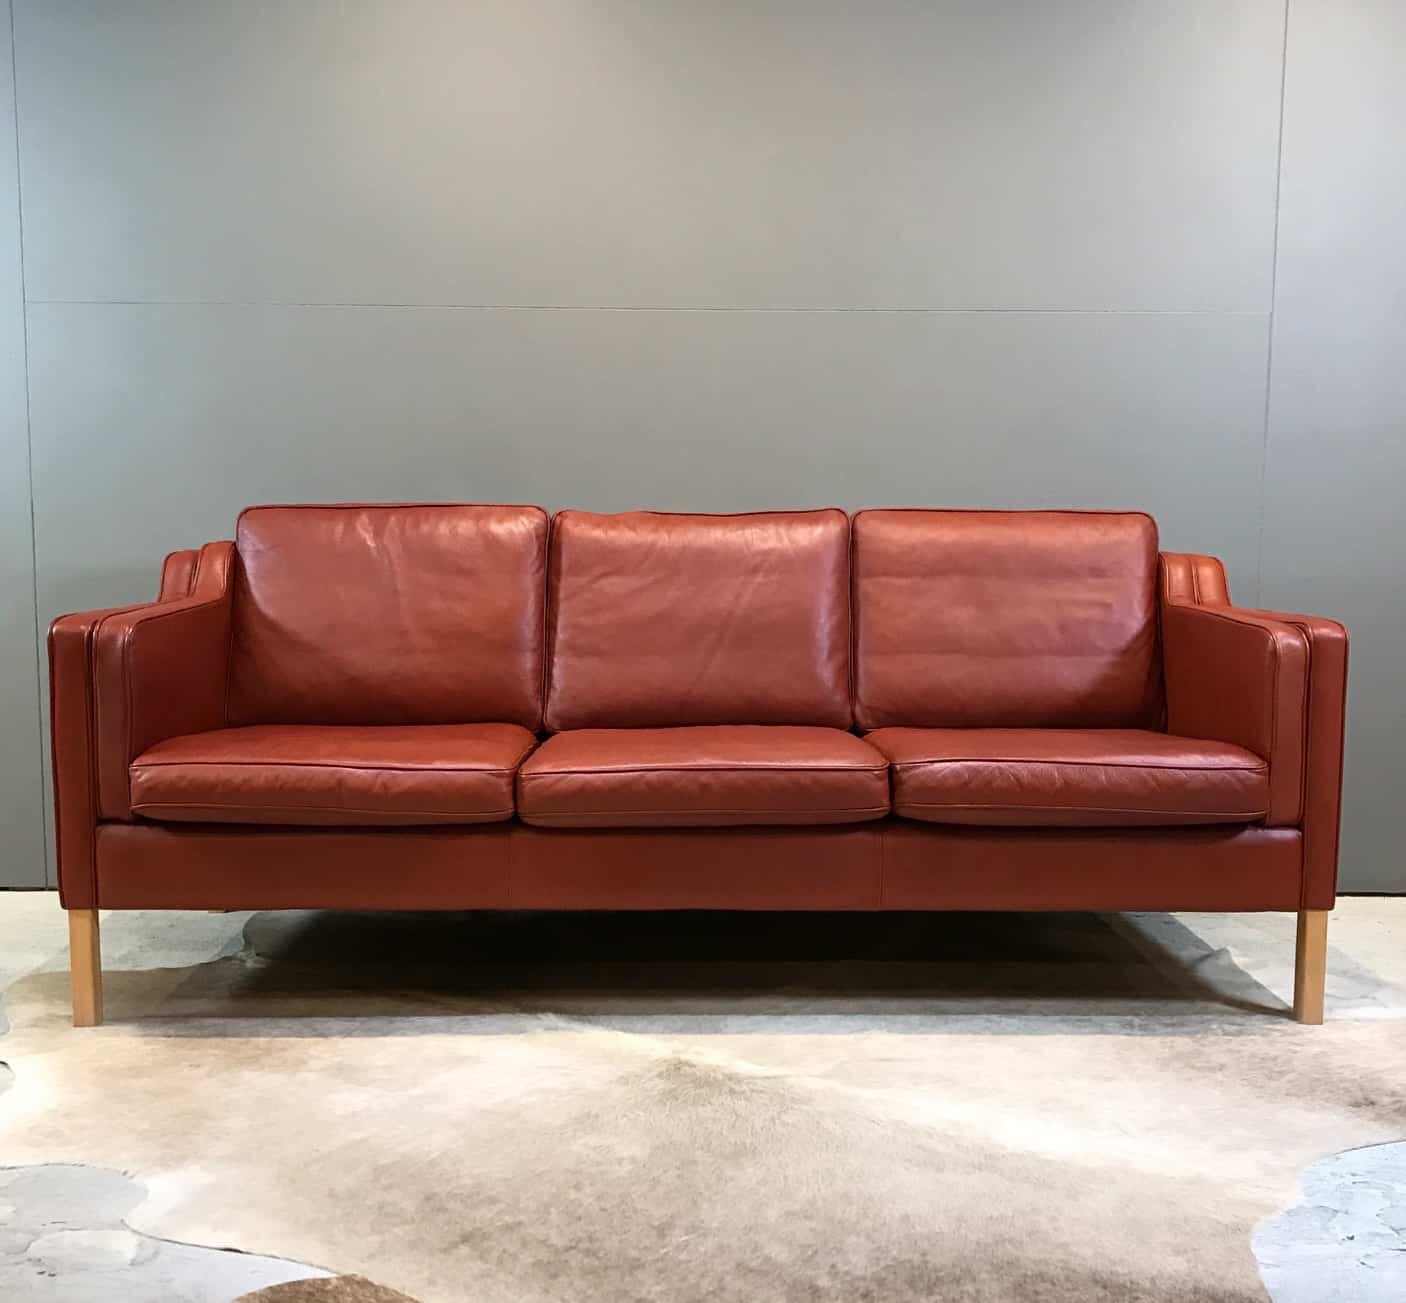 Mid Century Furniture Melbourne, Vintage Leather Couch Melbourne